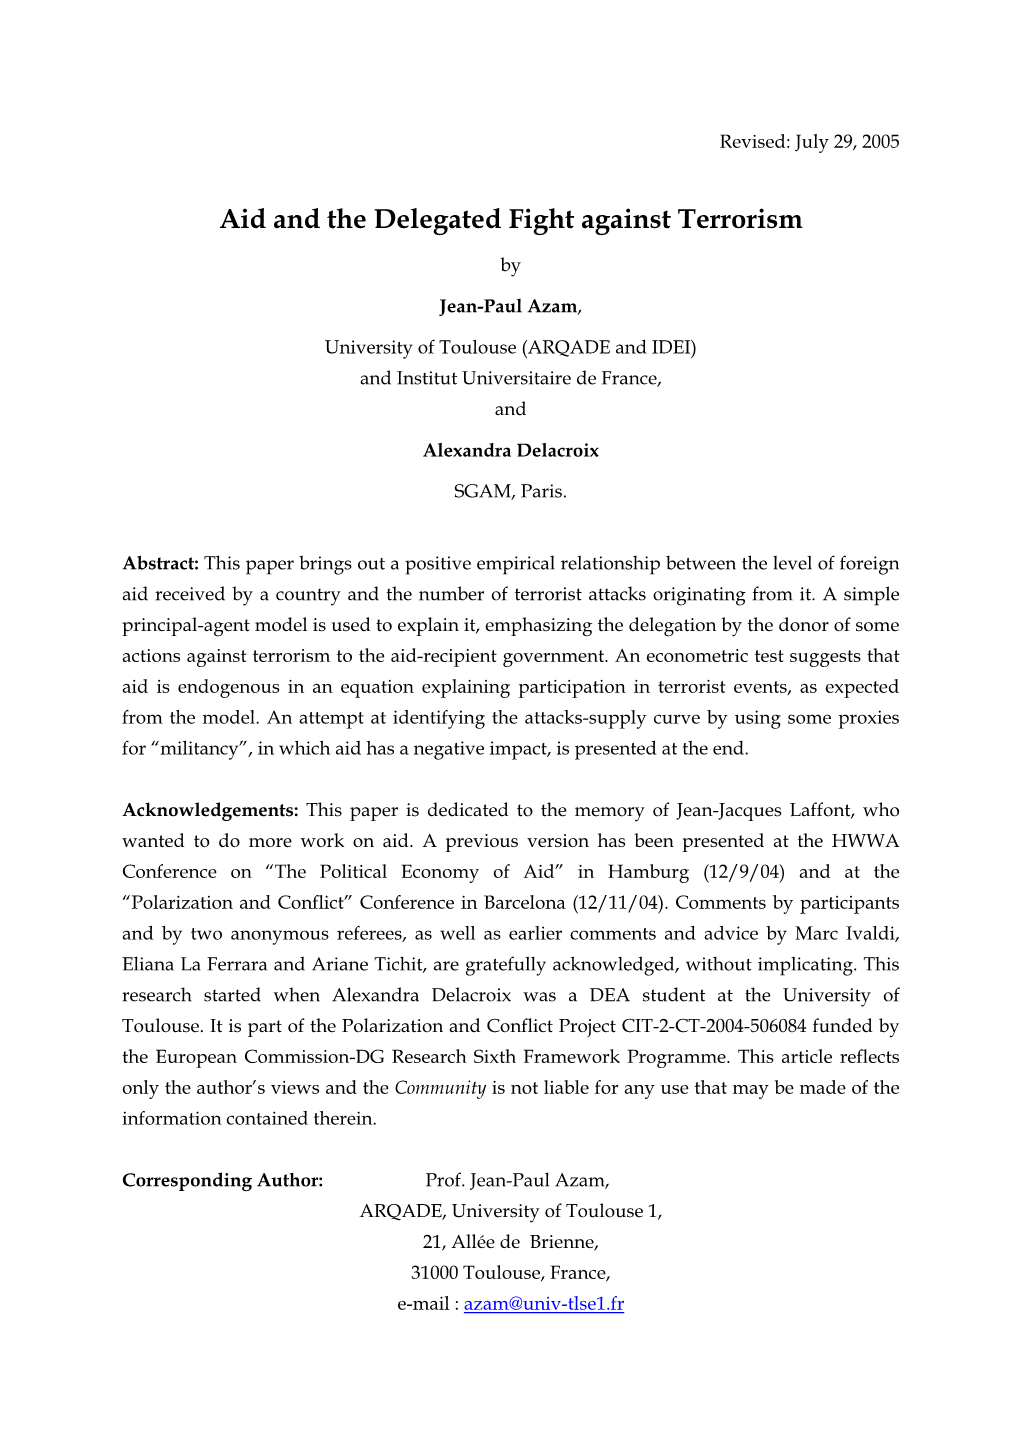 Aid and the Delegated Fight Against Terrorism